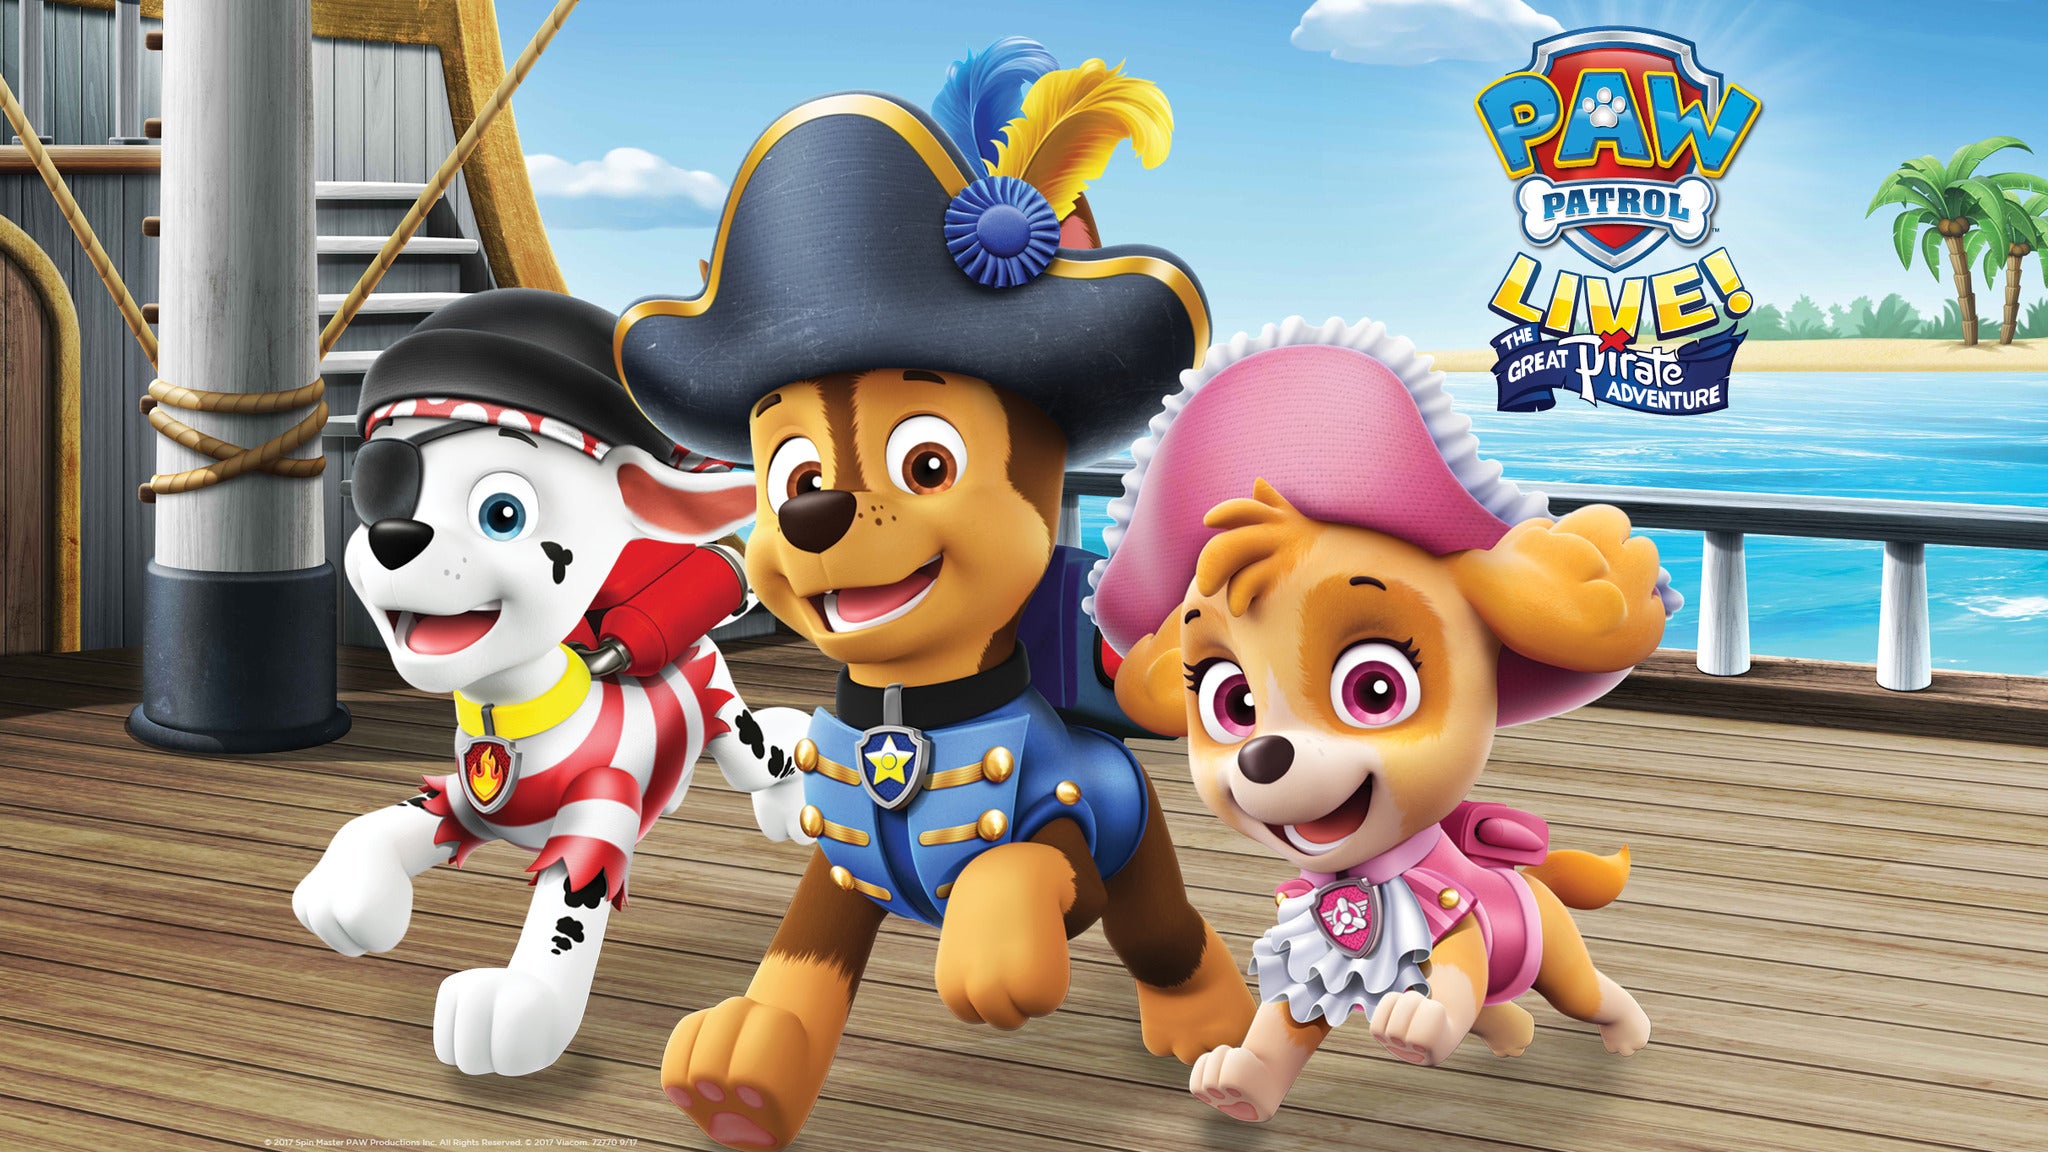 PAW Patrol Live! The Great Pirate Adventure in San Jose promo photo for Official Platinum presale offer code